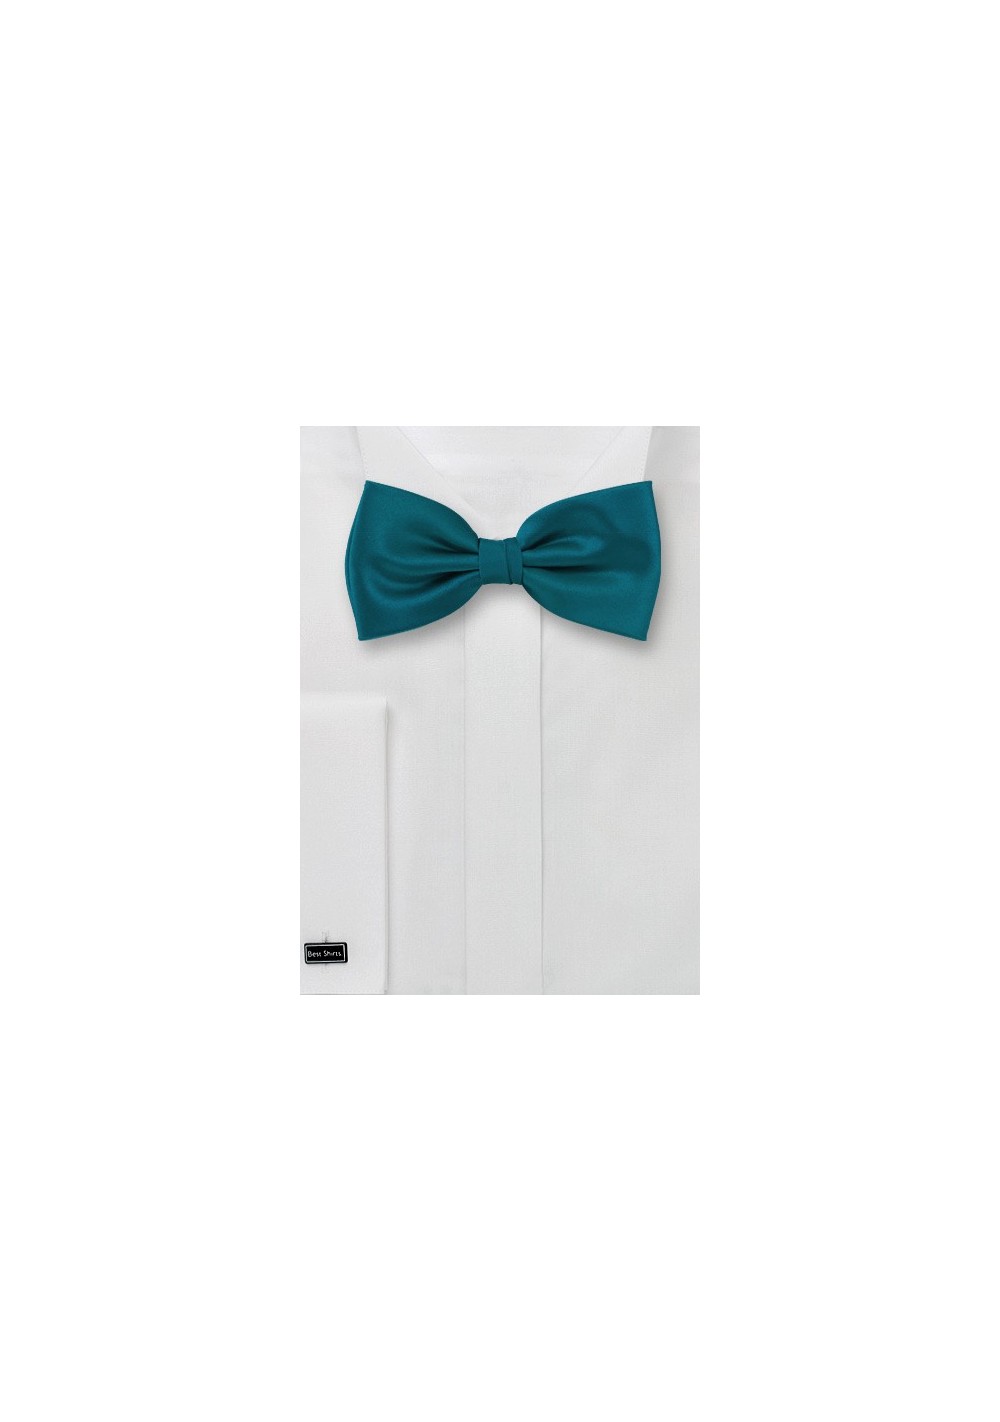 Peacock Blue Bow Tie